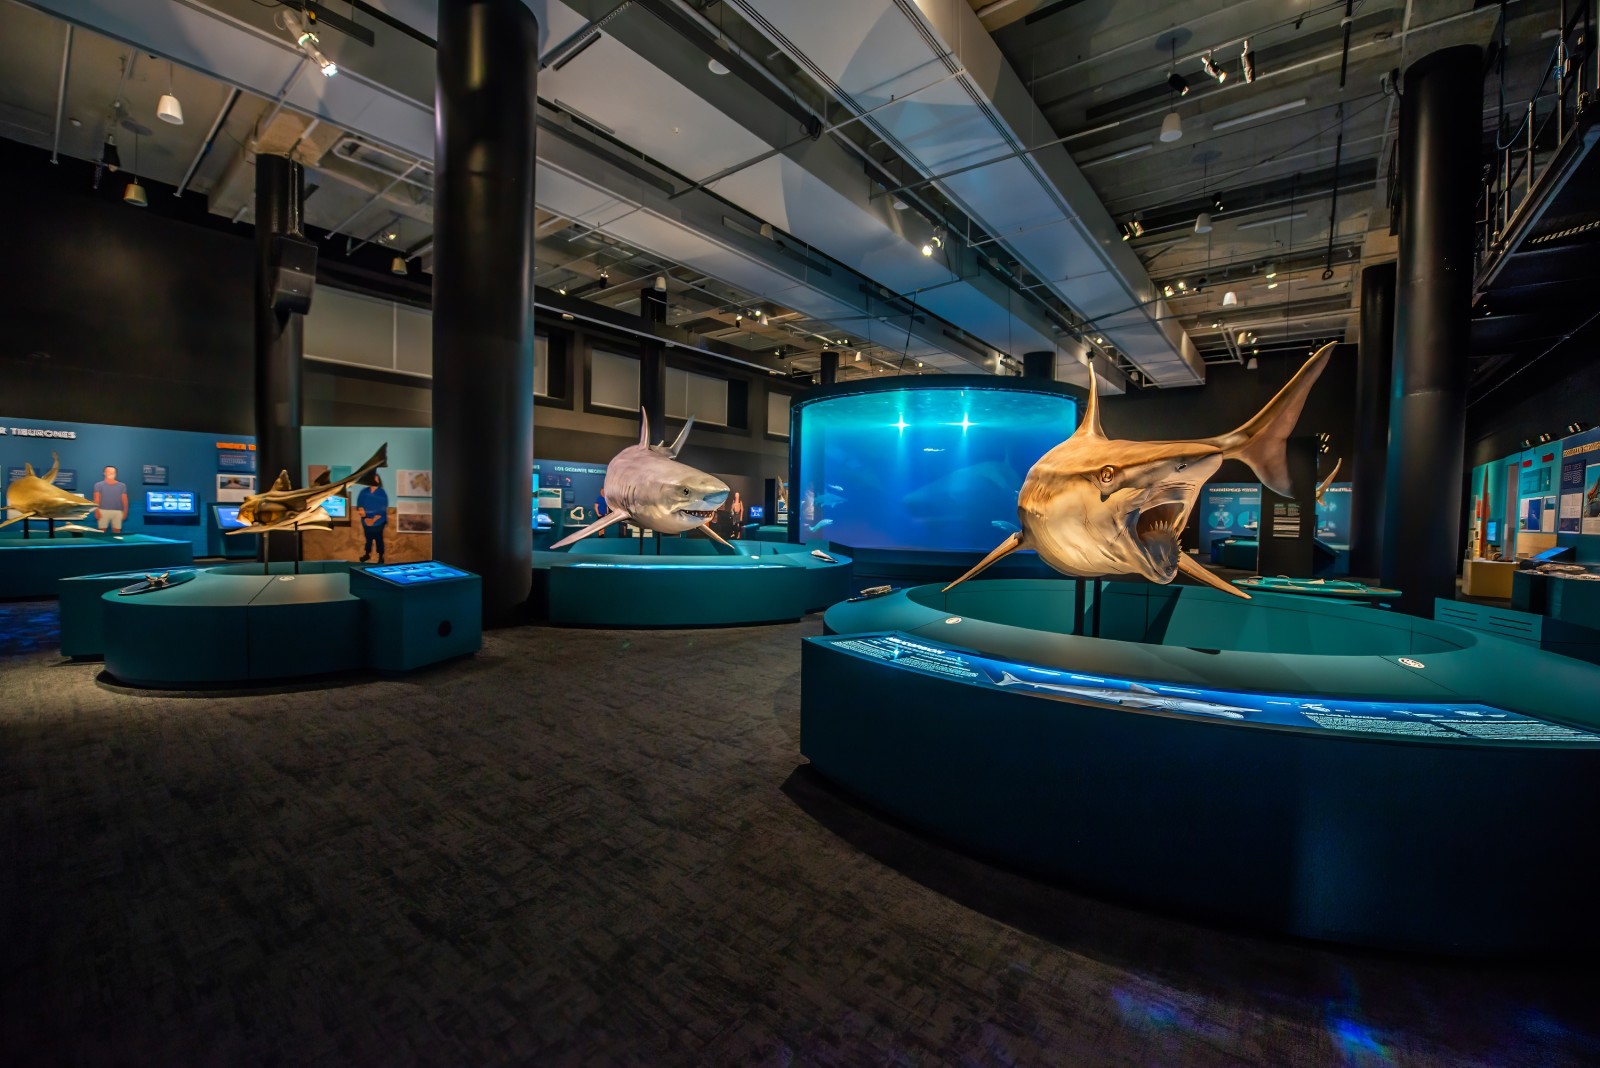 Jan 28, Sensory-Friendly Sundays at Museum of Discovery and Science